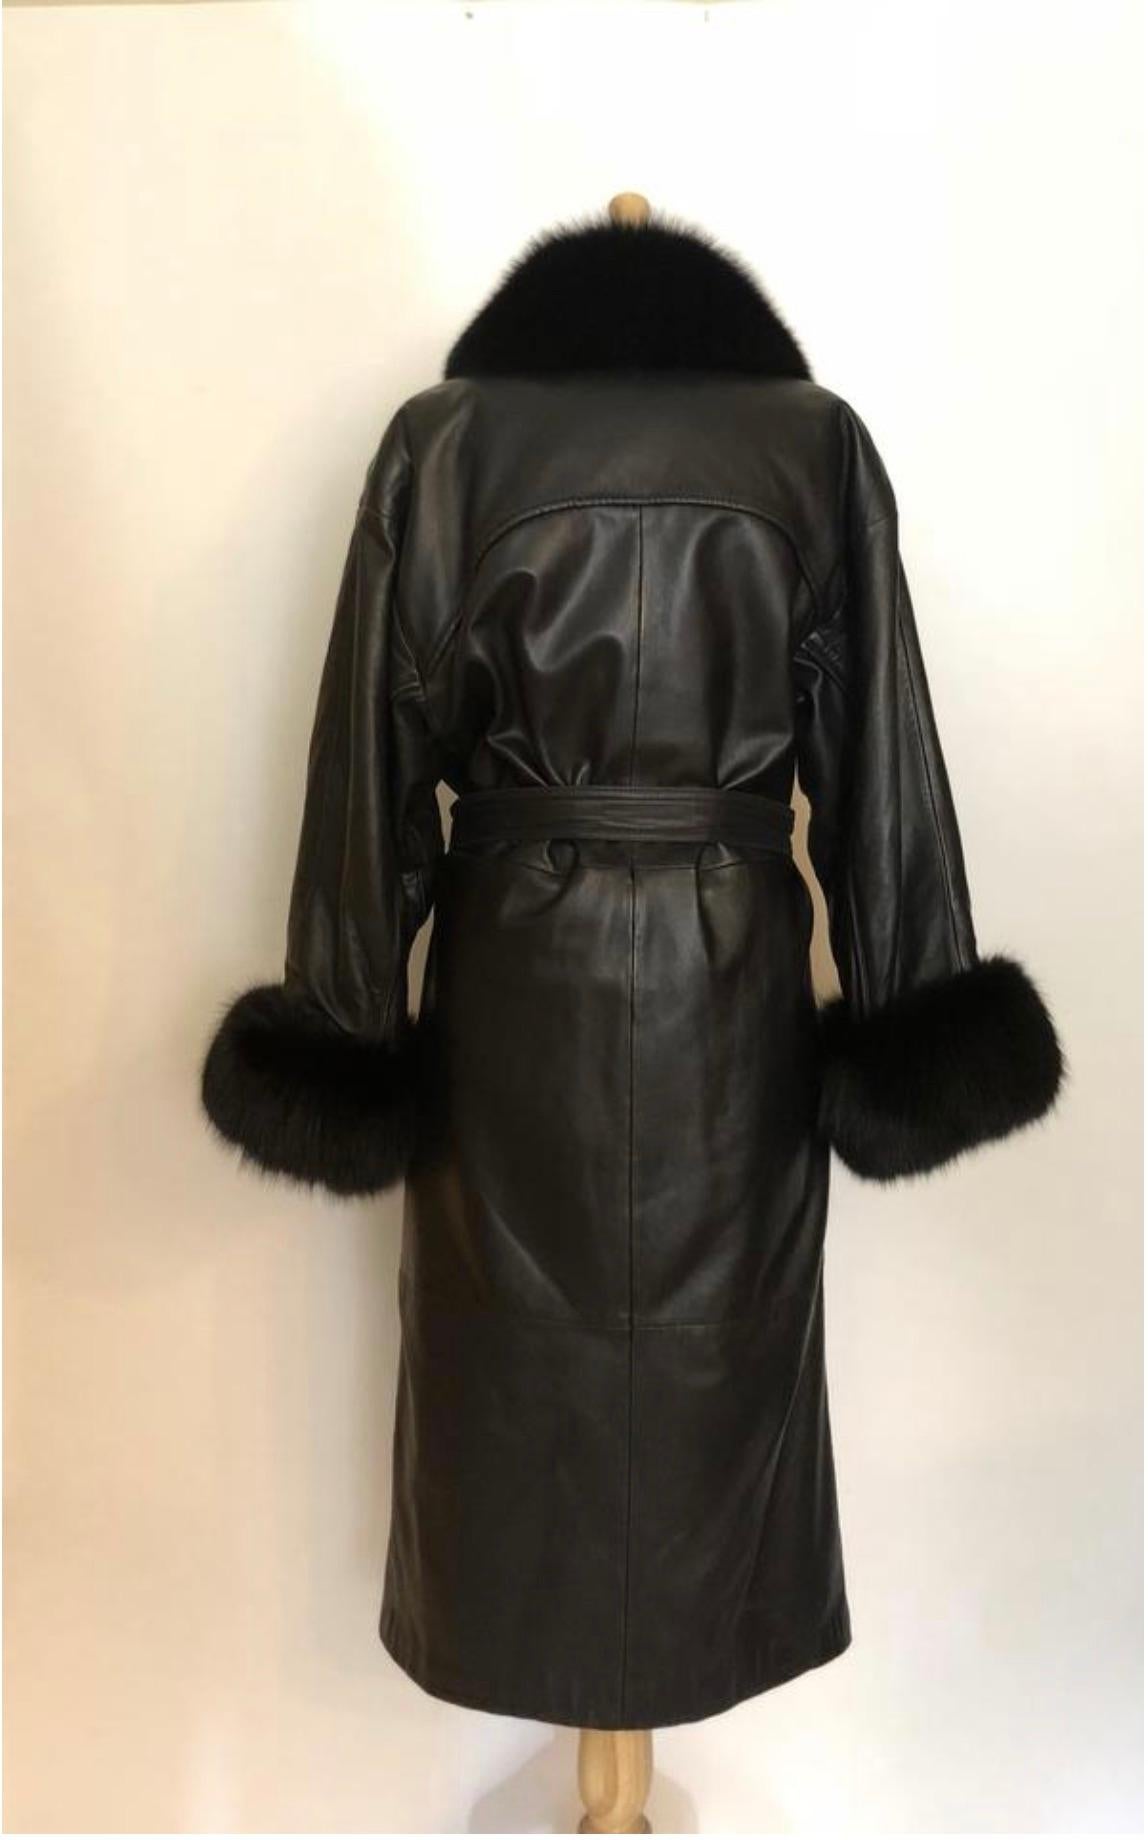  Adolfo Black Leather and Fox Long Winter Coat with Belt In Excellent Condition For Sale In Saint Charles, IL